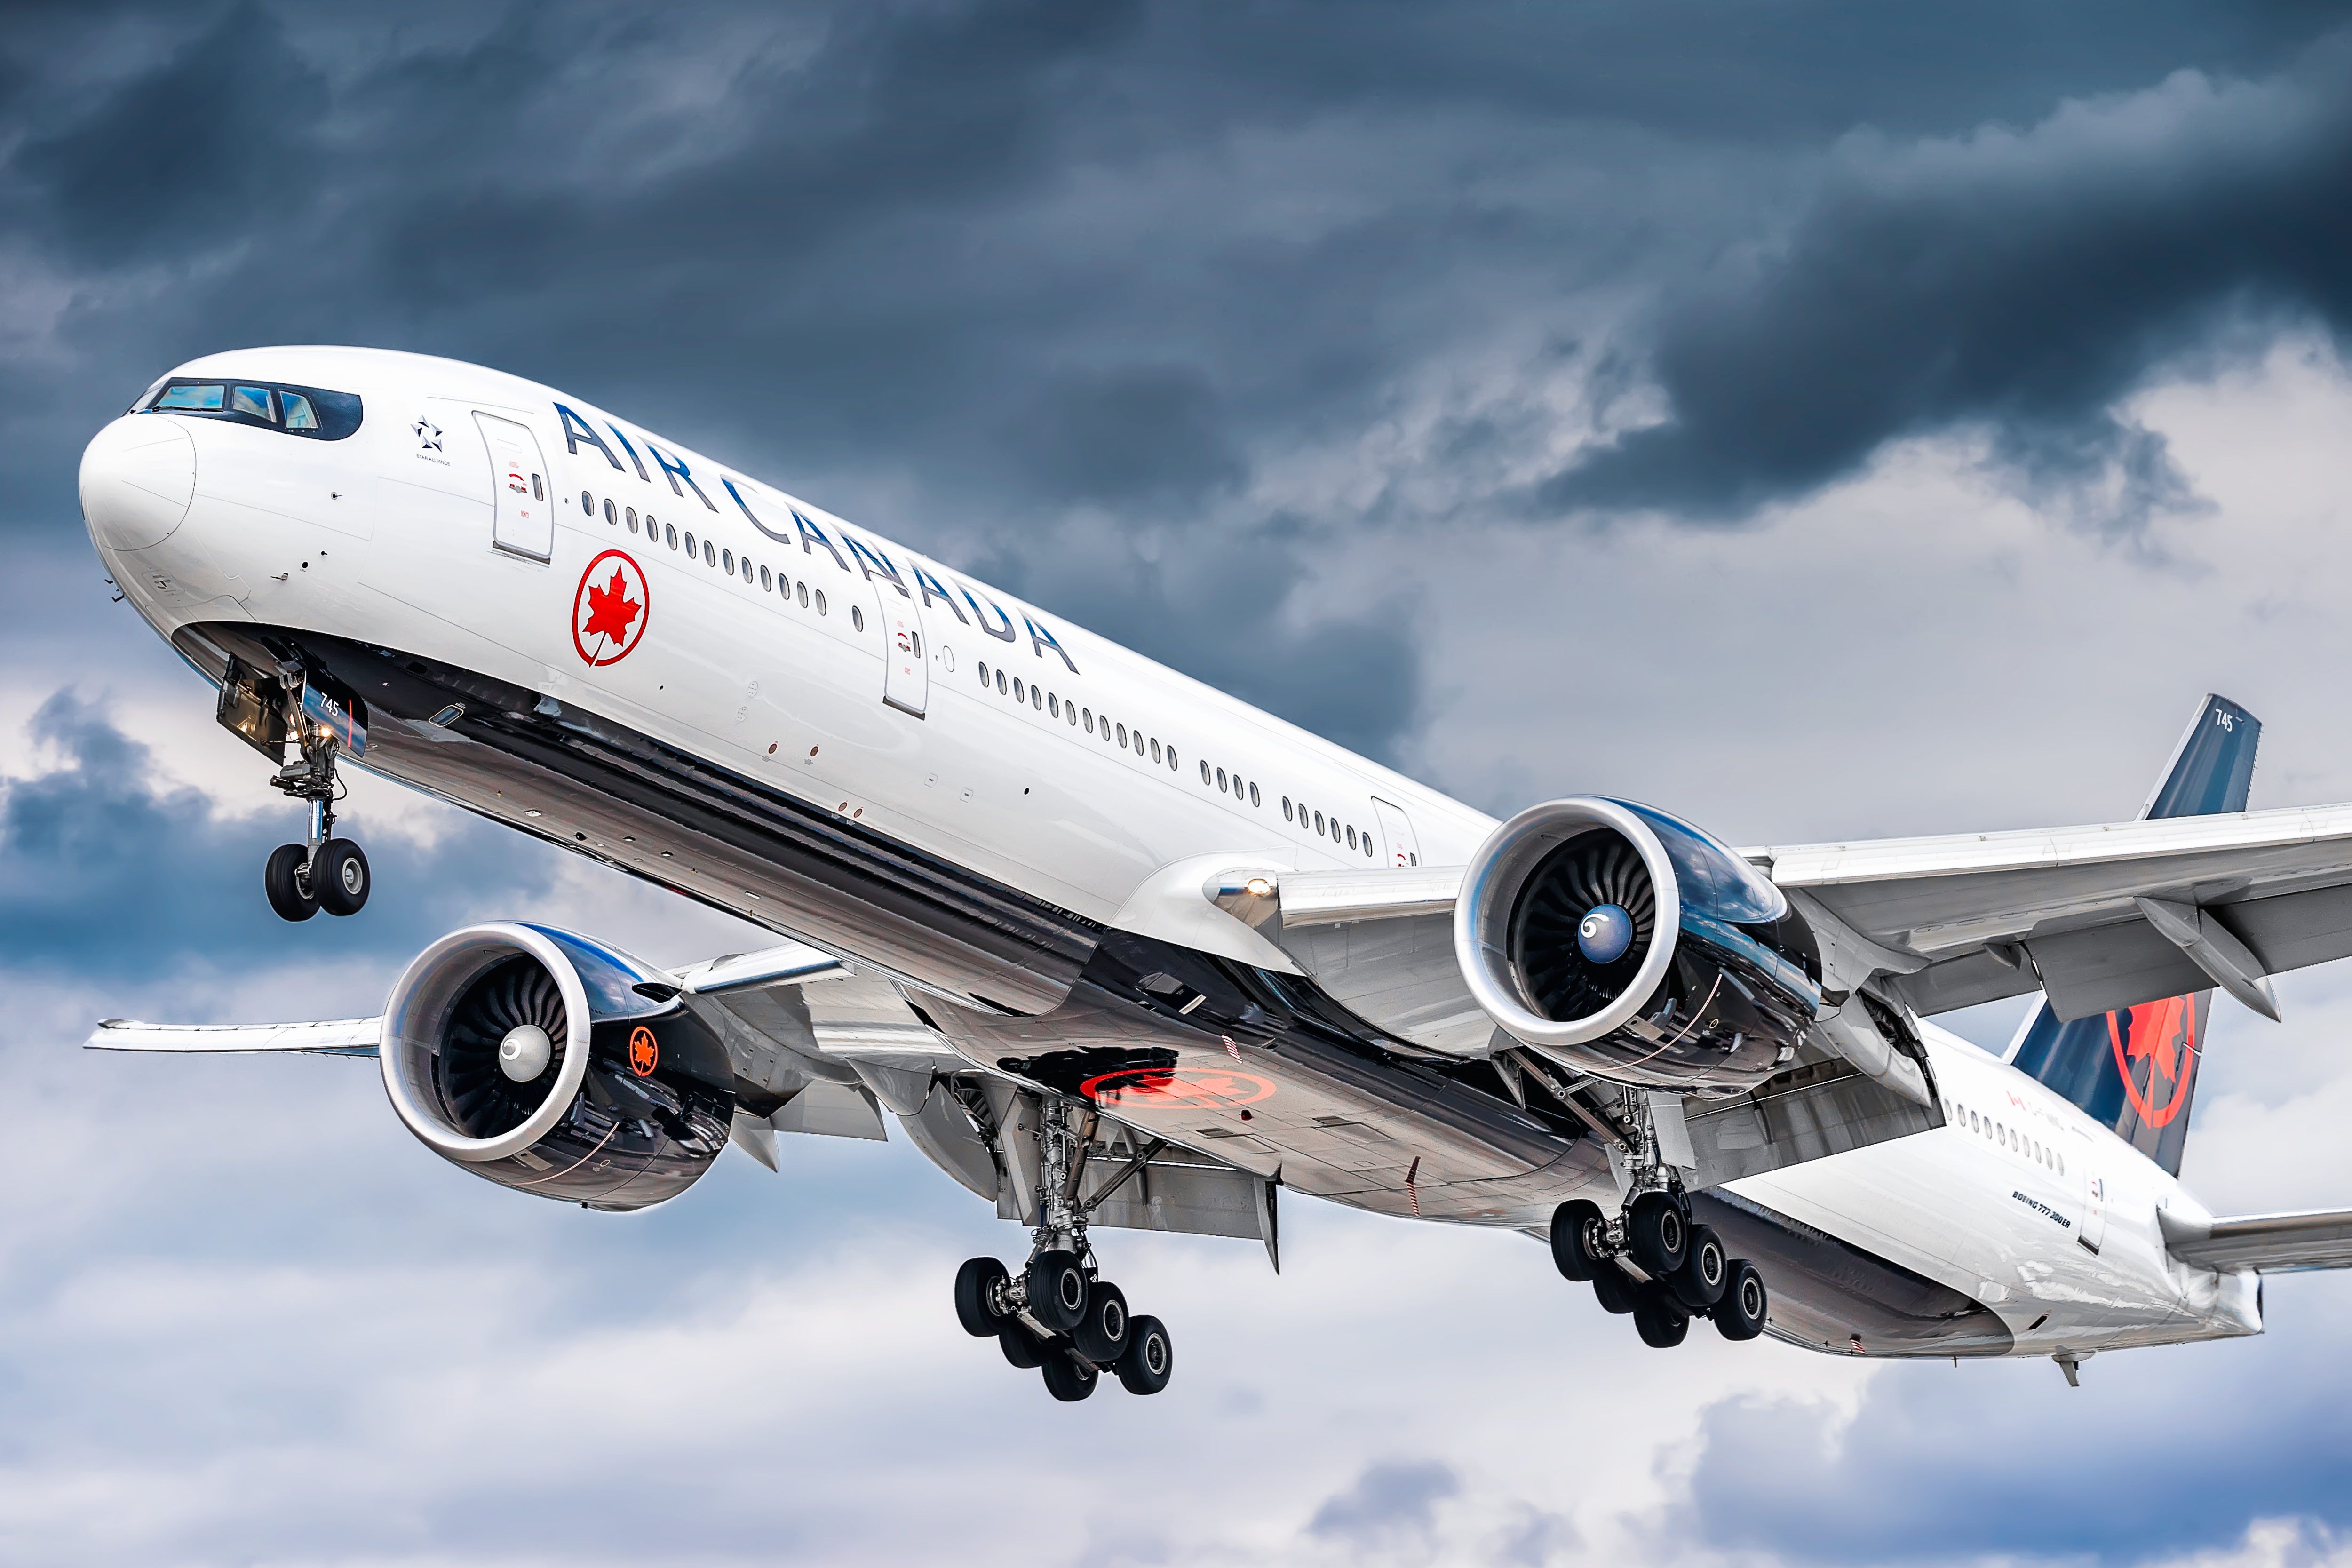 Air Canada discontinues service on 30 domestic regional routes and closes 8 stations in Canada